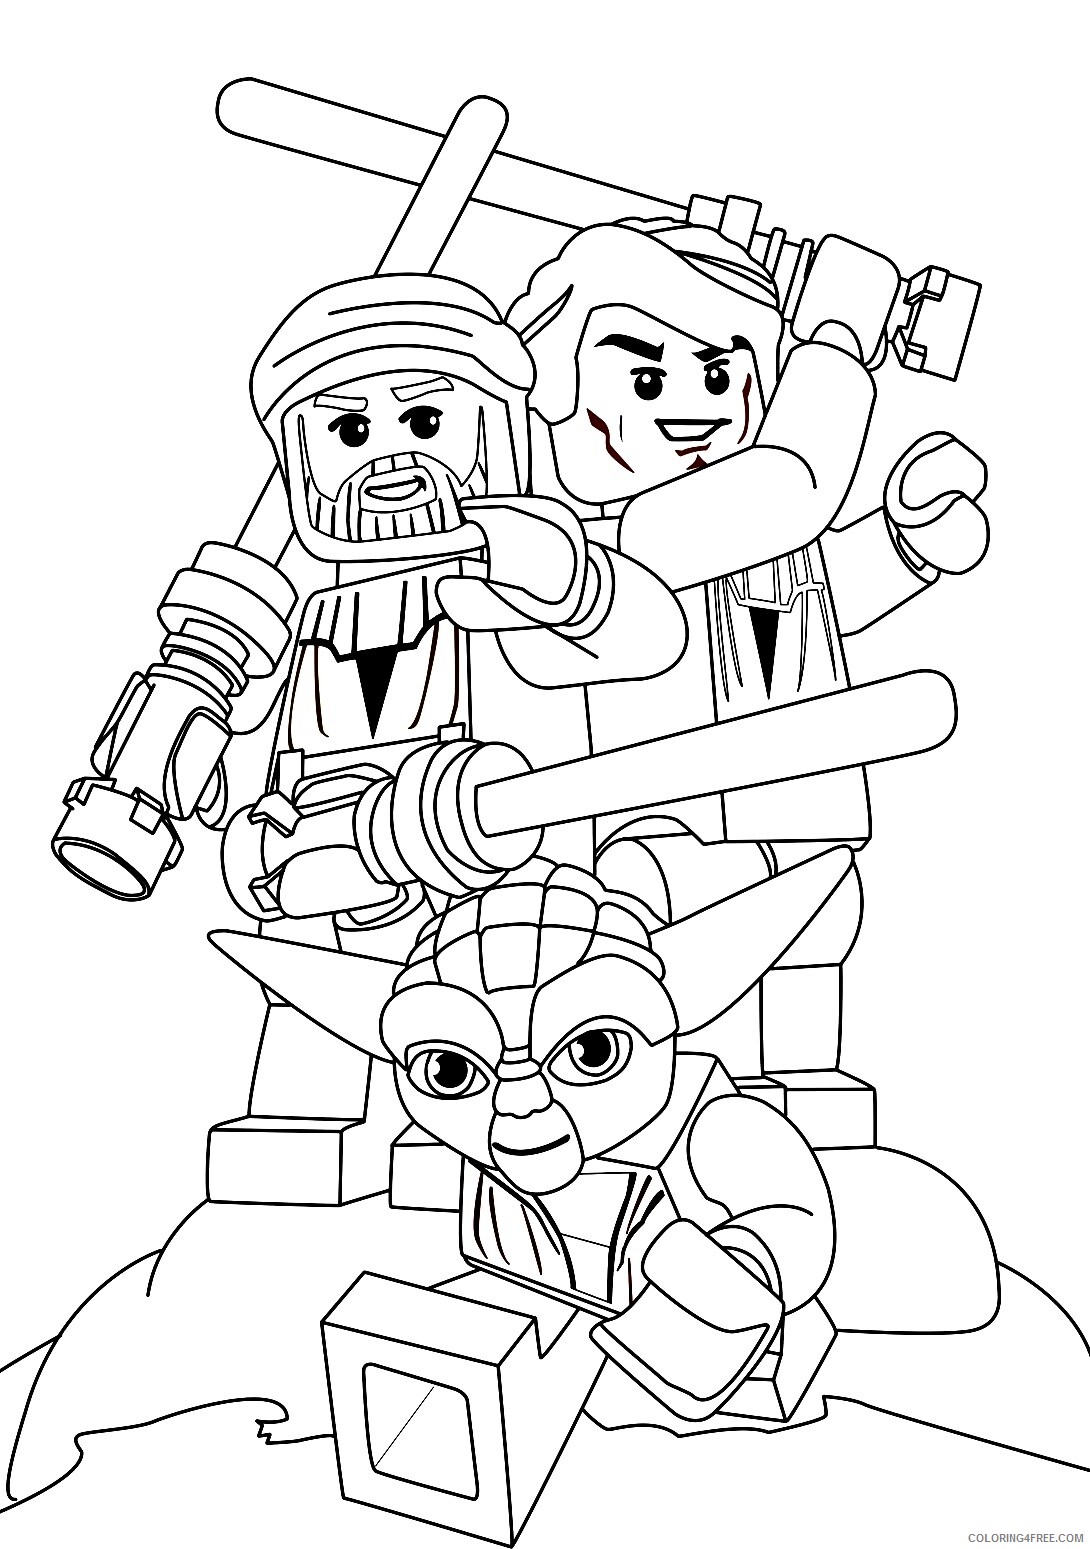 Star Wars Coloring Pages TV Film Star Wars Lego Printable 2020 08030 Coloring4free